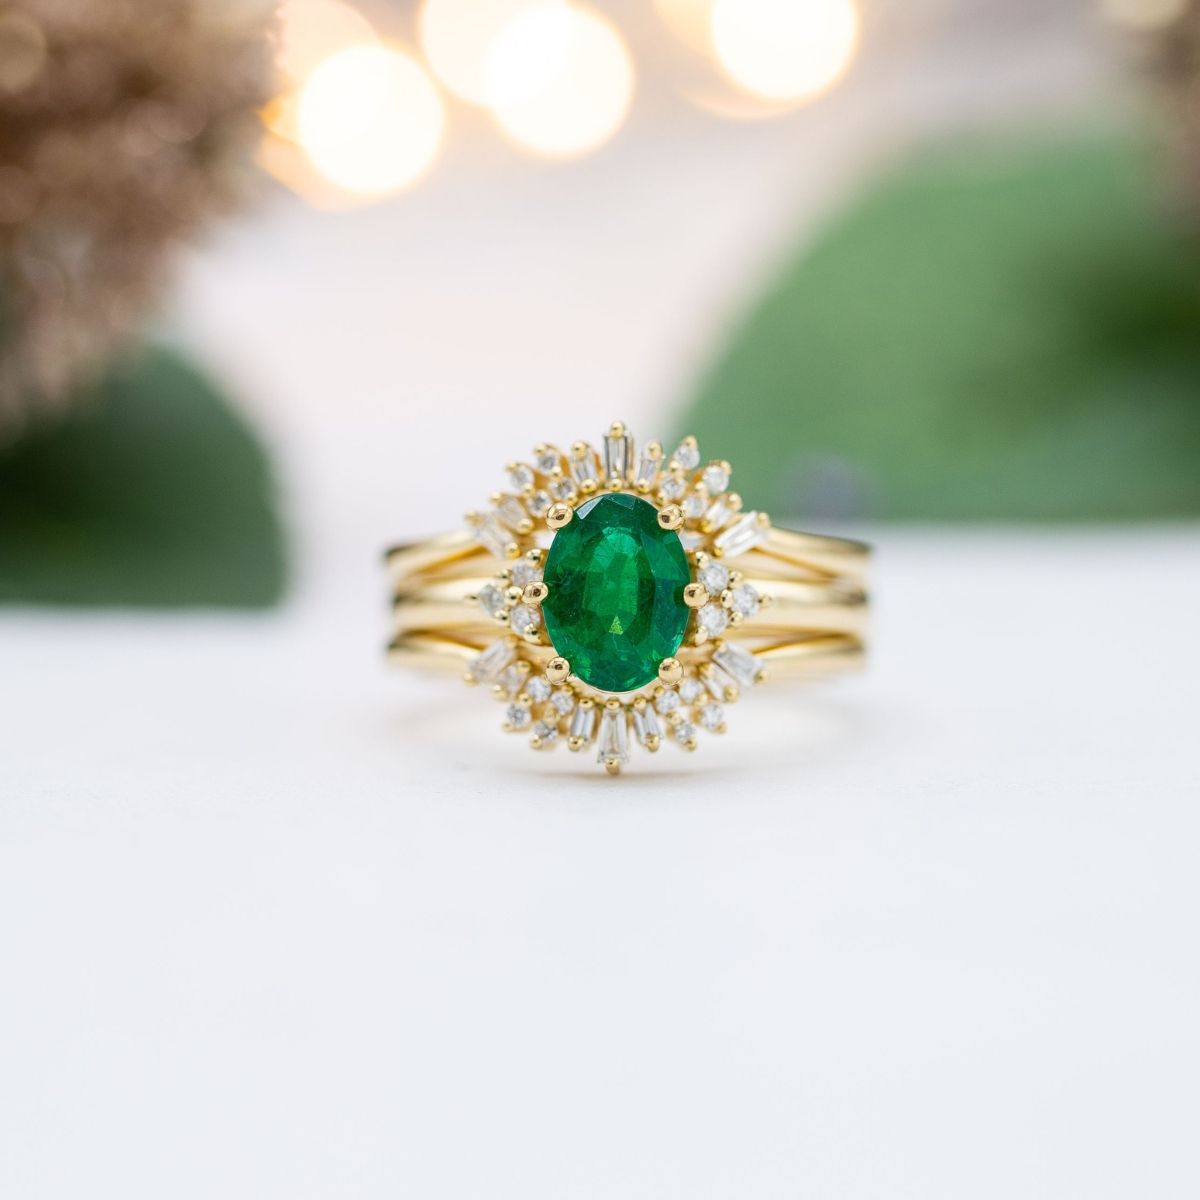 How to pick the perfect emerald | CustomMade.com